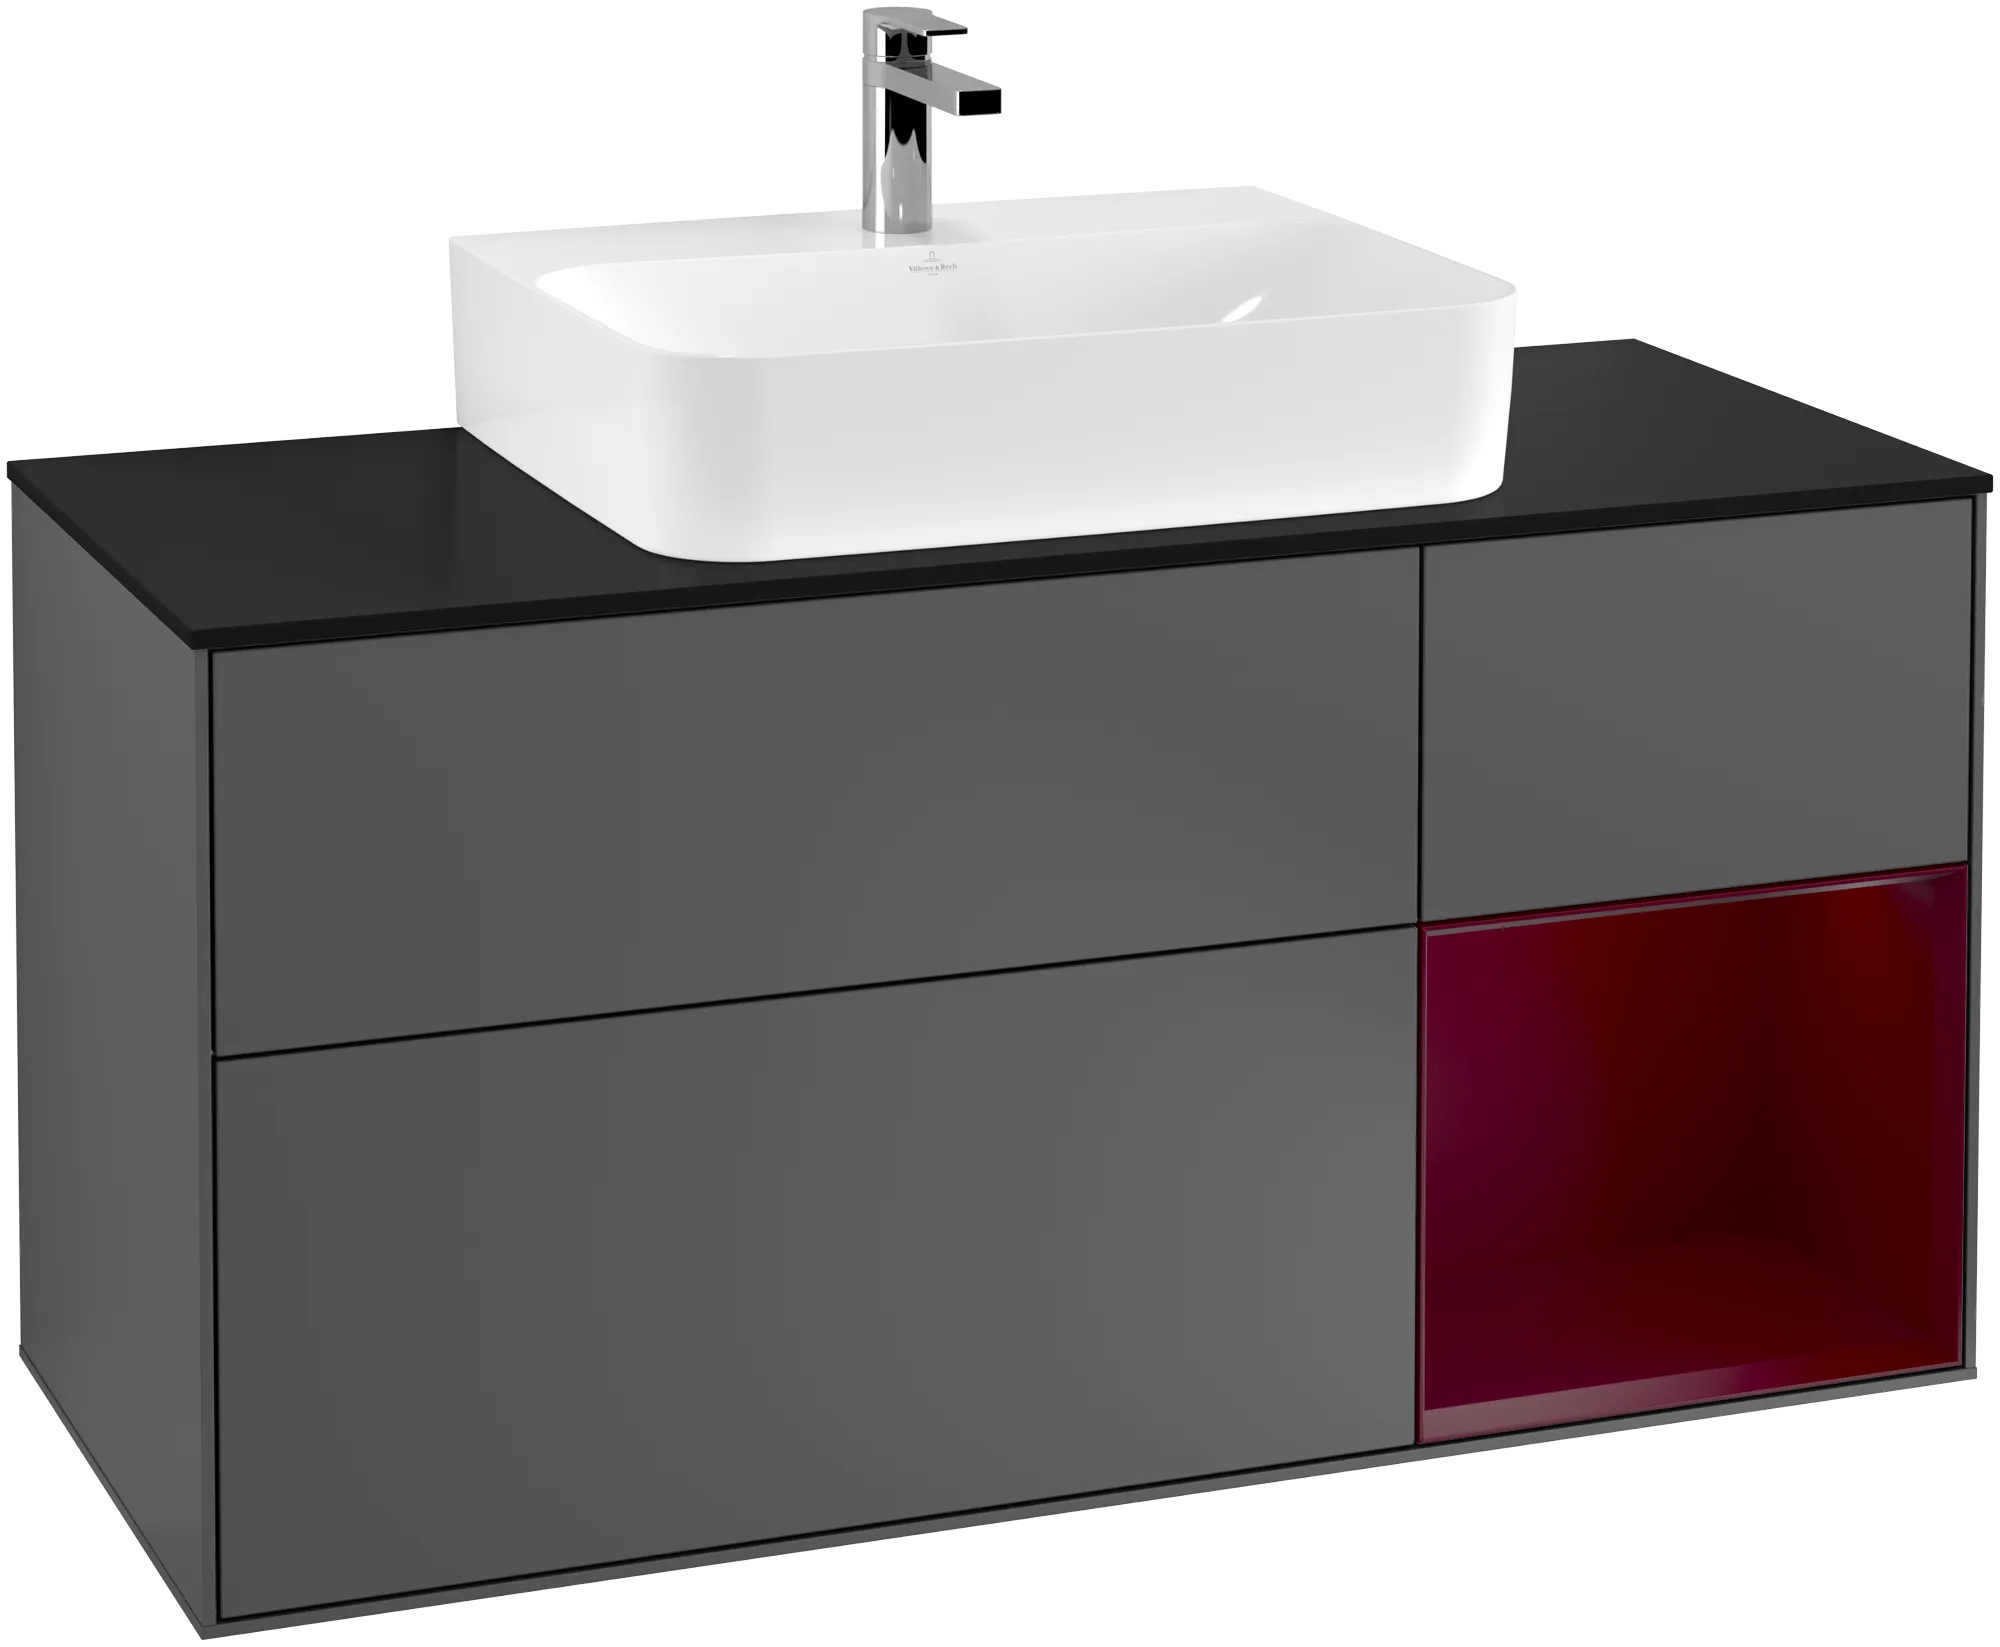 VILLEROY BOCH Finion Vanity unit, with lighting, 3 pull-out compartments, 1200 x 603 x 501 mm, Anthracite Matt Lacquer / Peony Matt Lacquer / Glass Black Matt #G172HBGK resmi